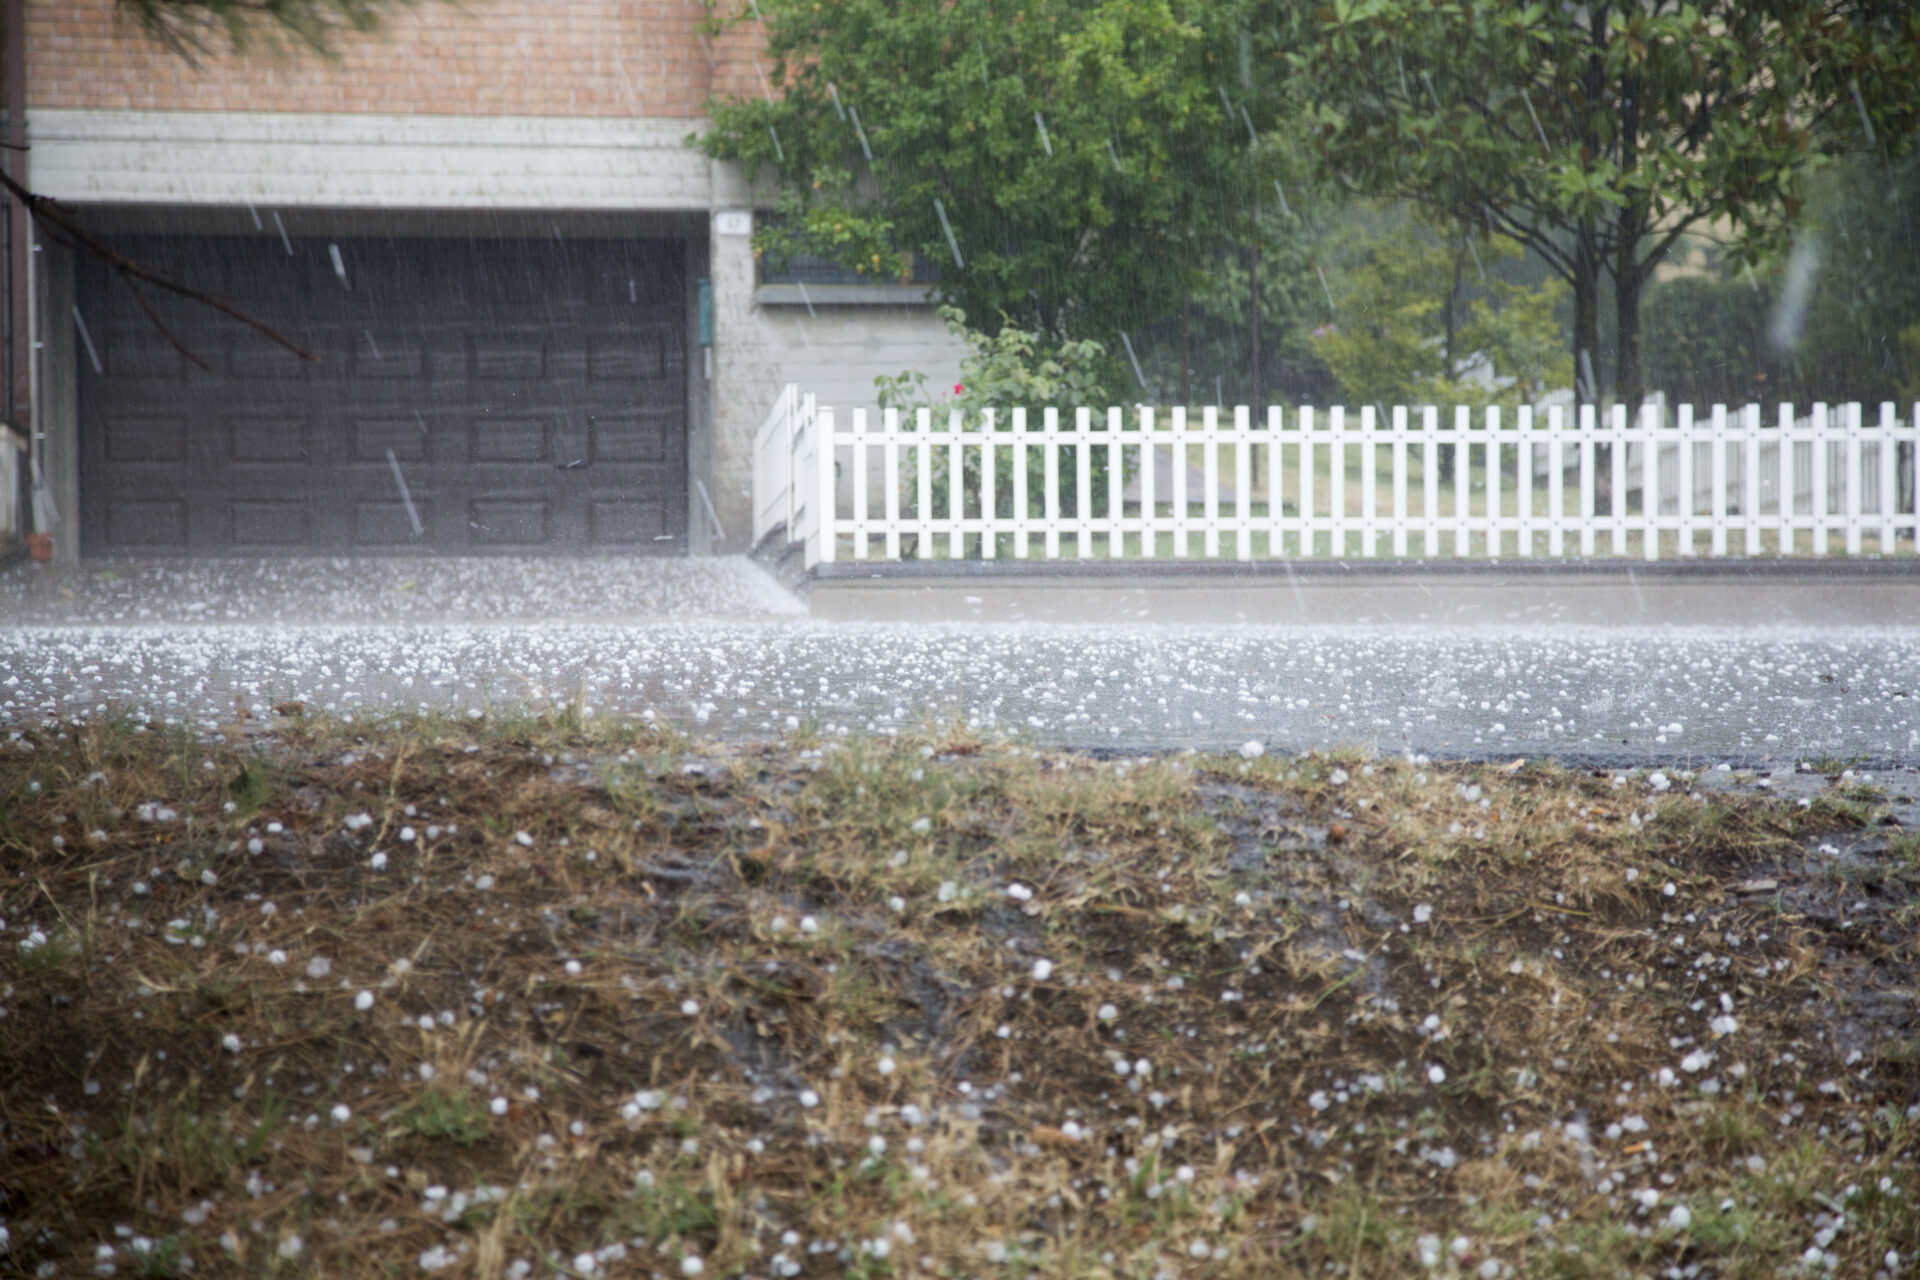 The front of a home and yard in the middle of a hail storm.